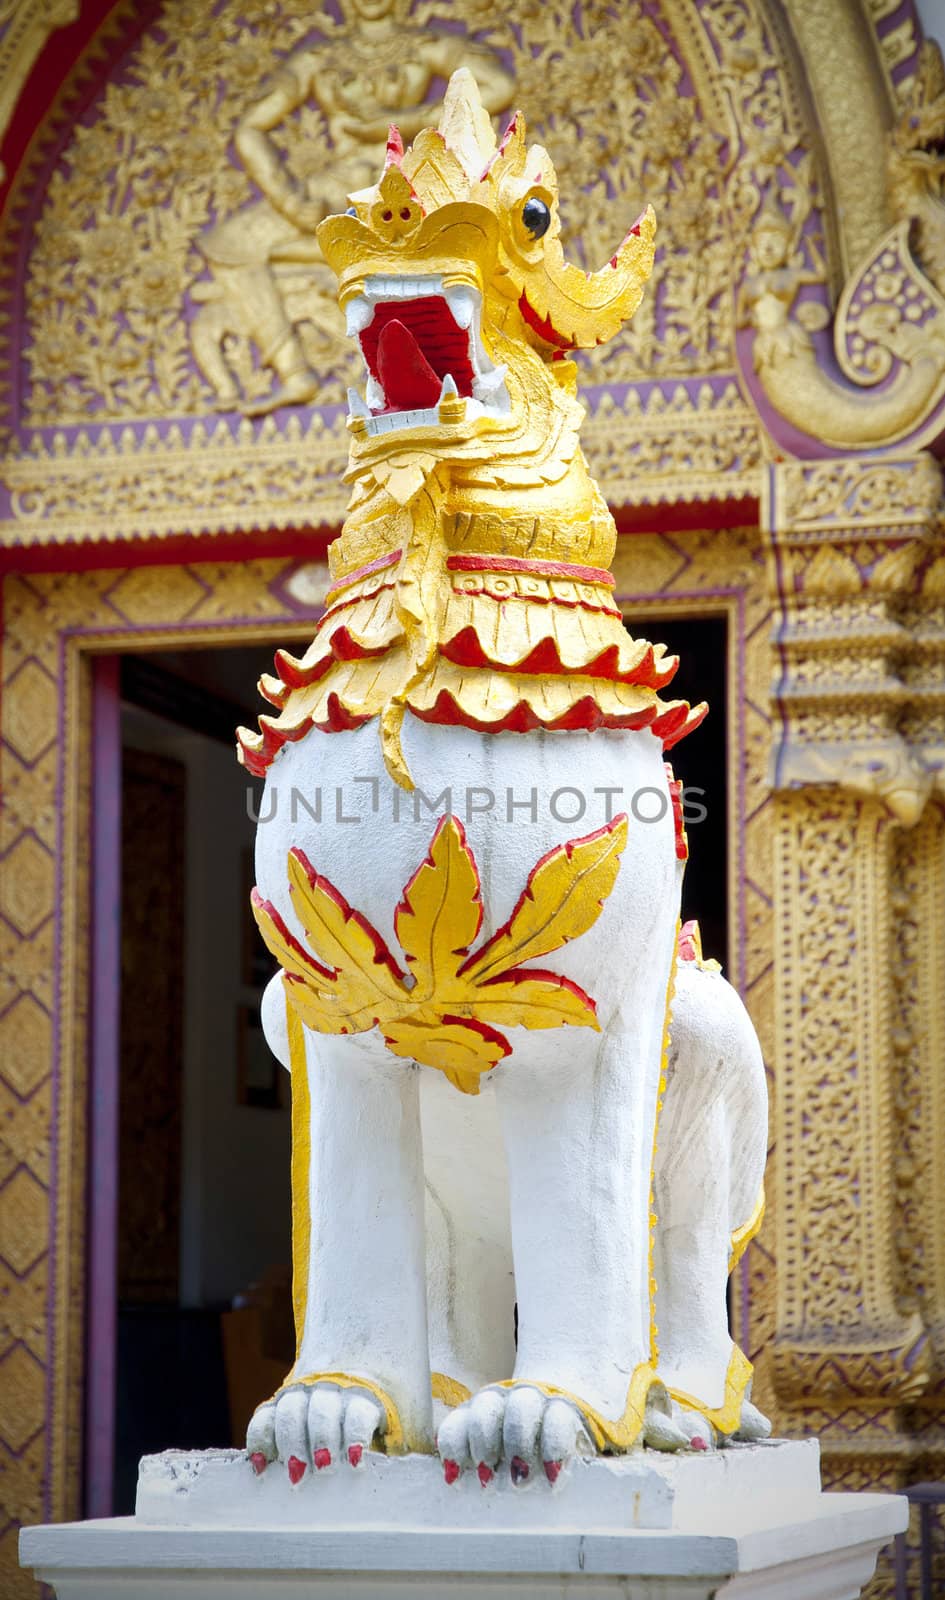 Singh statue in a temple in northern Thailand.